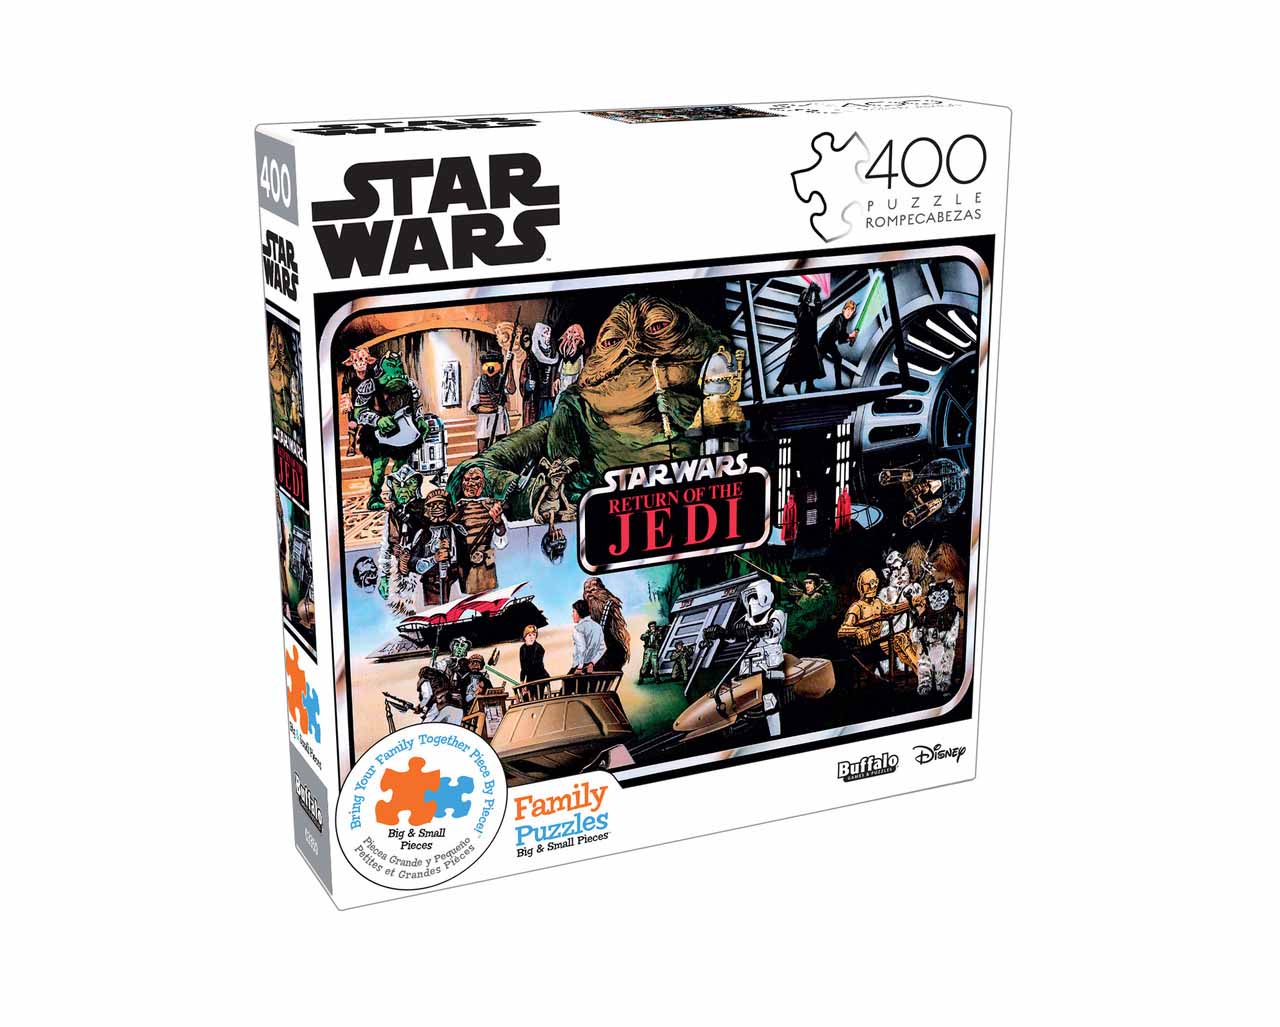 Return of the Jedi Collector's Case Art Movies & TV Jigsaw Puzzle